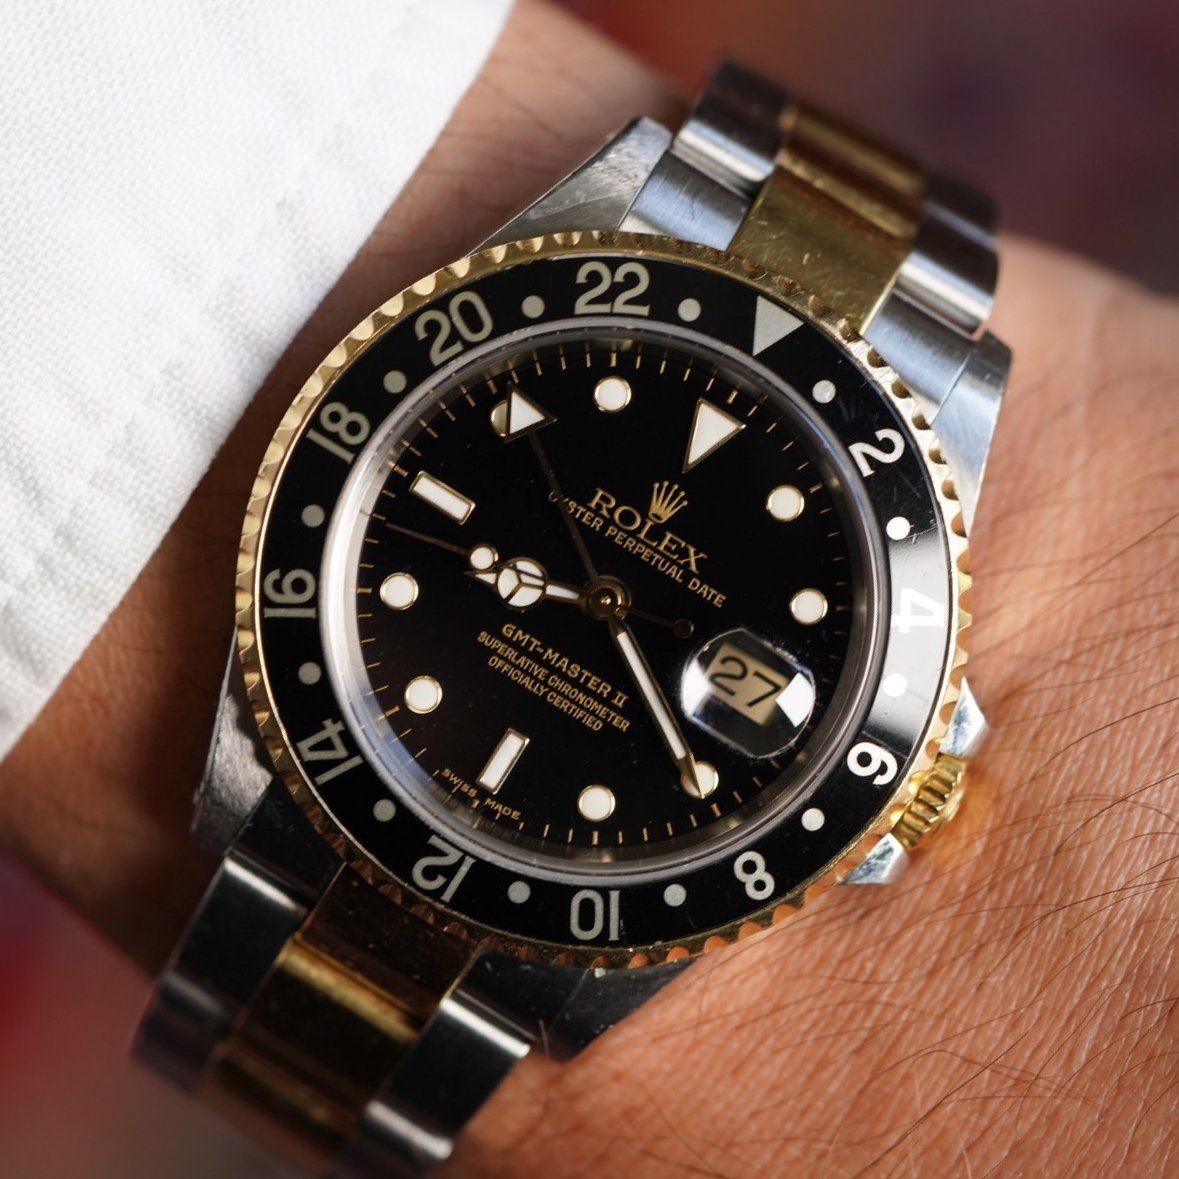 Rolex GMT-Master II Reference 16713 Unpolished w/ Papers